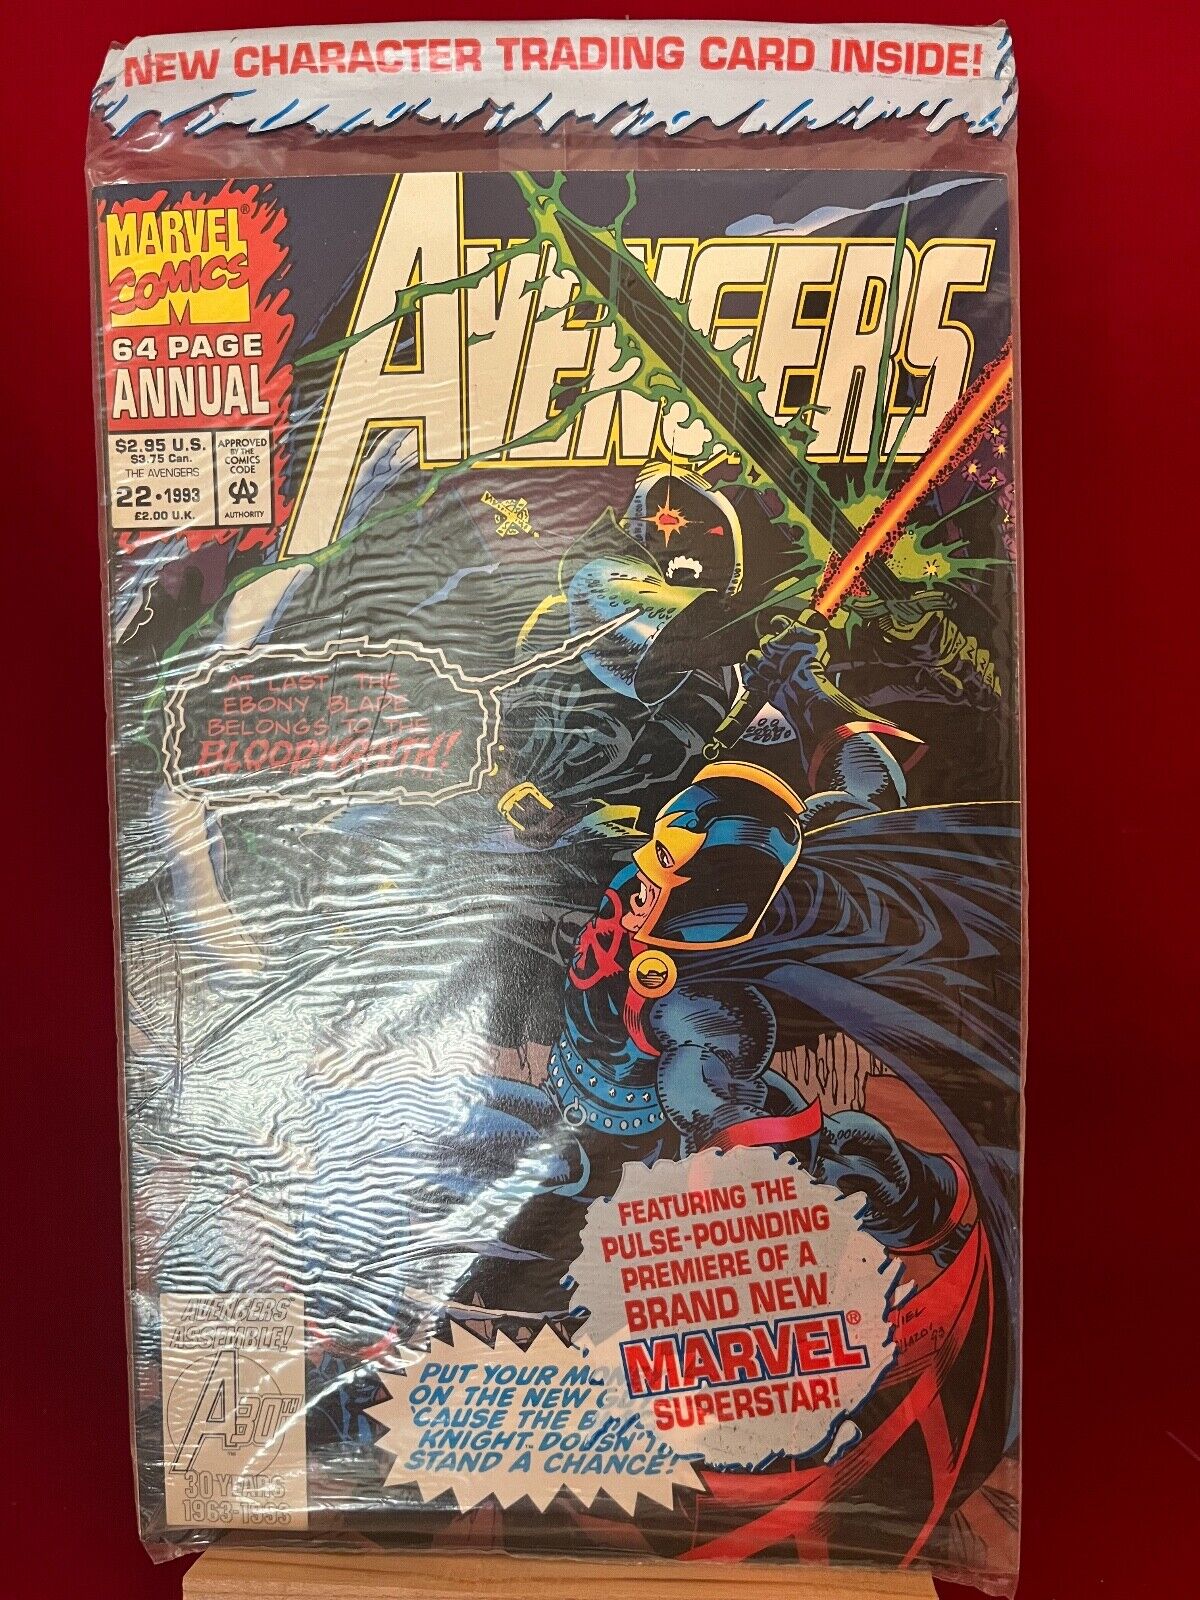 AVENGERS 64 page ANNUAL #22  First App BLOODWRAITH